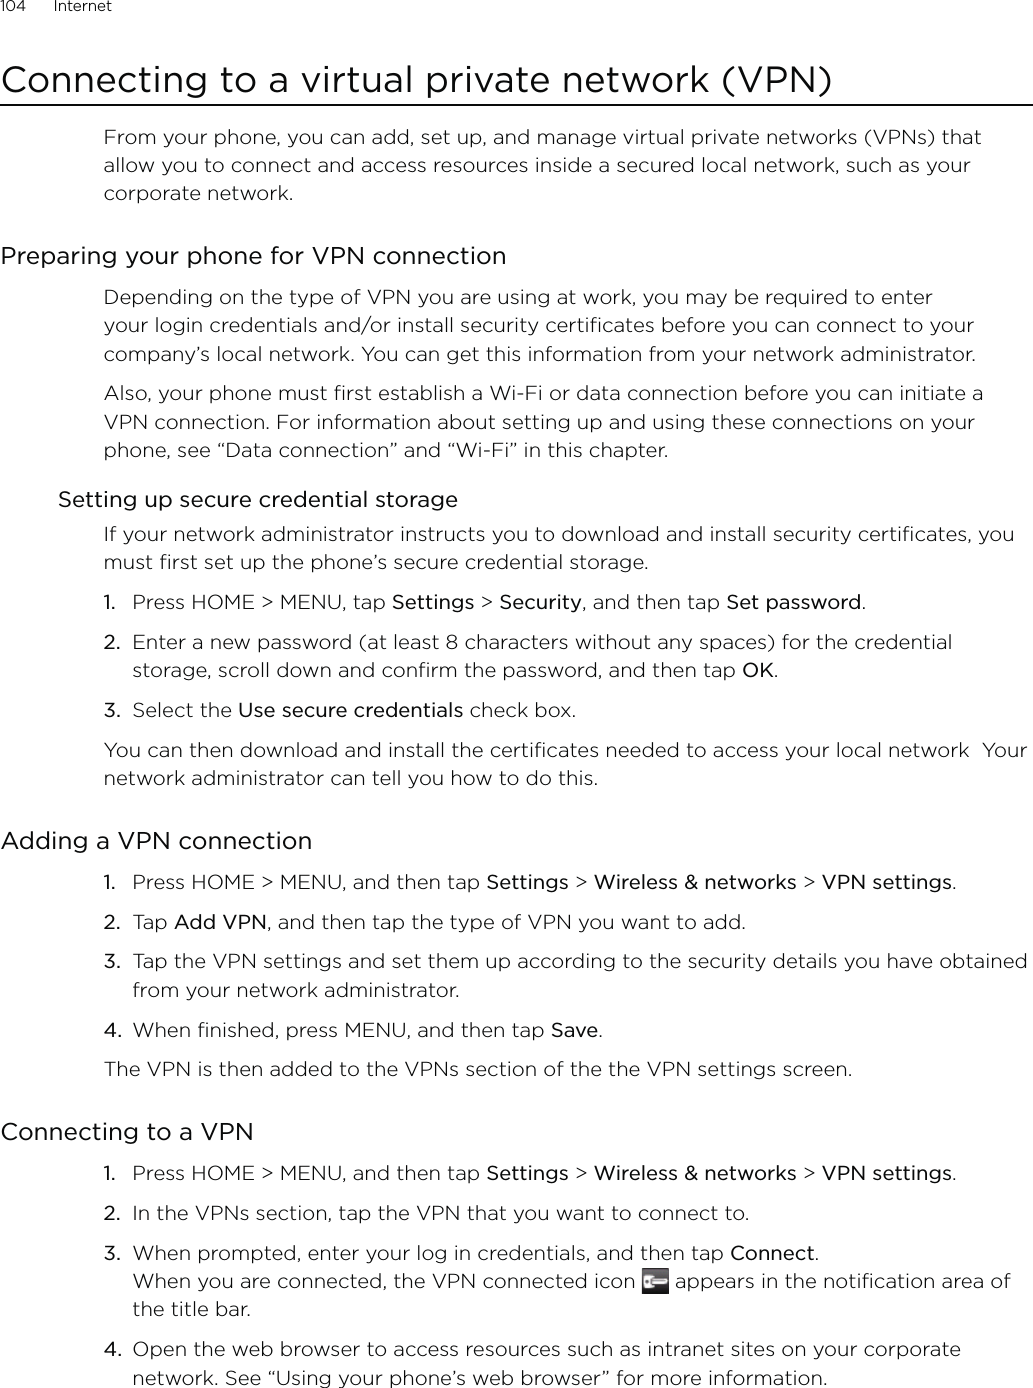 104      Internet      Connecting to a virtual private network (VPN)From your phone, you can add, set up, and manage virtual private networks (VPNs) that allow you to connect and access resources inside a secured local network, such as your corporate network.Preparing your phone for VPN connectionDepending on the type of VPN you are using at work, you may be required to enter your login credentials and/or install security certificates before you can connect to your company’s local network. You can get this information from your network administrator. Also, your phone must first establish a Wi-Fi or data connection before you can initiate a VPN connection. For information about setting up and using these connections on your phone, see “Data connection” and “Wi-Fi” in this chapter.Setting up secure credential storageIf your network administrator instructs you to download and install security certificates, you must first set up the phone’s secure credential storage.Press HOME &gt; MENU, tap Settings &gt; Security, and then tap Set password.Enter a new password (at least 8 characters without any spaces) for the credential storage, scroll down and confirm the password, and then tap OK.Select the Use secure credentials check box.You can then download and install the certificates needed to access your local network  Your network administrator can tell you how to do this.Adding a VPN connectionPress HOME &gt; MENU, and then tap Settings &gt; Wireless &amp; networks &gt; VPN settings.Tap Add VPN, and then tap the type of VPN you want to add.Tap the VPN settings and set them up according to the security details you have obtained from your network administrator.When finished, press MENU, and then tap Save.The VPN is then added to the VPNs section of the the VPN settings screen.Connecting to a VPNPress HOME &gt; MENU, and then tap Settings &gt; Wireless &amp; networks &gt; VPN settings.In the VPNs section, tap the VPN that you want to connect to.When prompted, enter your log in credentials, and then tap Connect. When you are connected, the VPN connected icon   appears in the notification area of the title bar.Open the web browser to access resources such as intranet sites on your corporate network. See “Using your phone’s web browser” for more information.1.2.3.1.2.3.4.1.2.3.4.